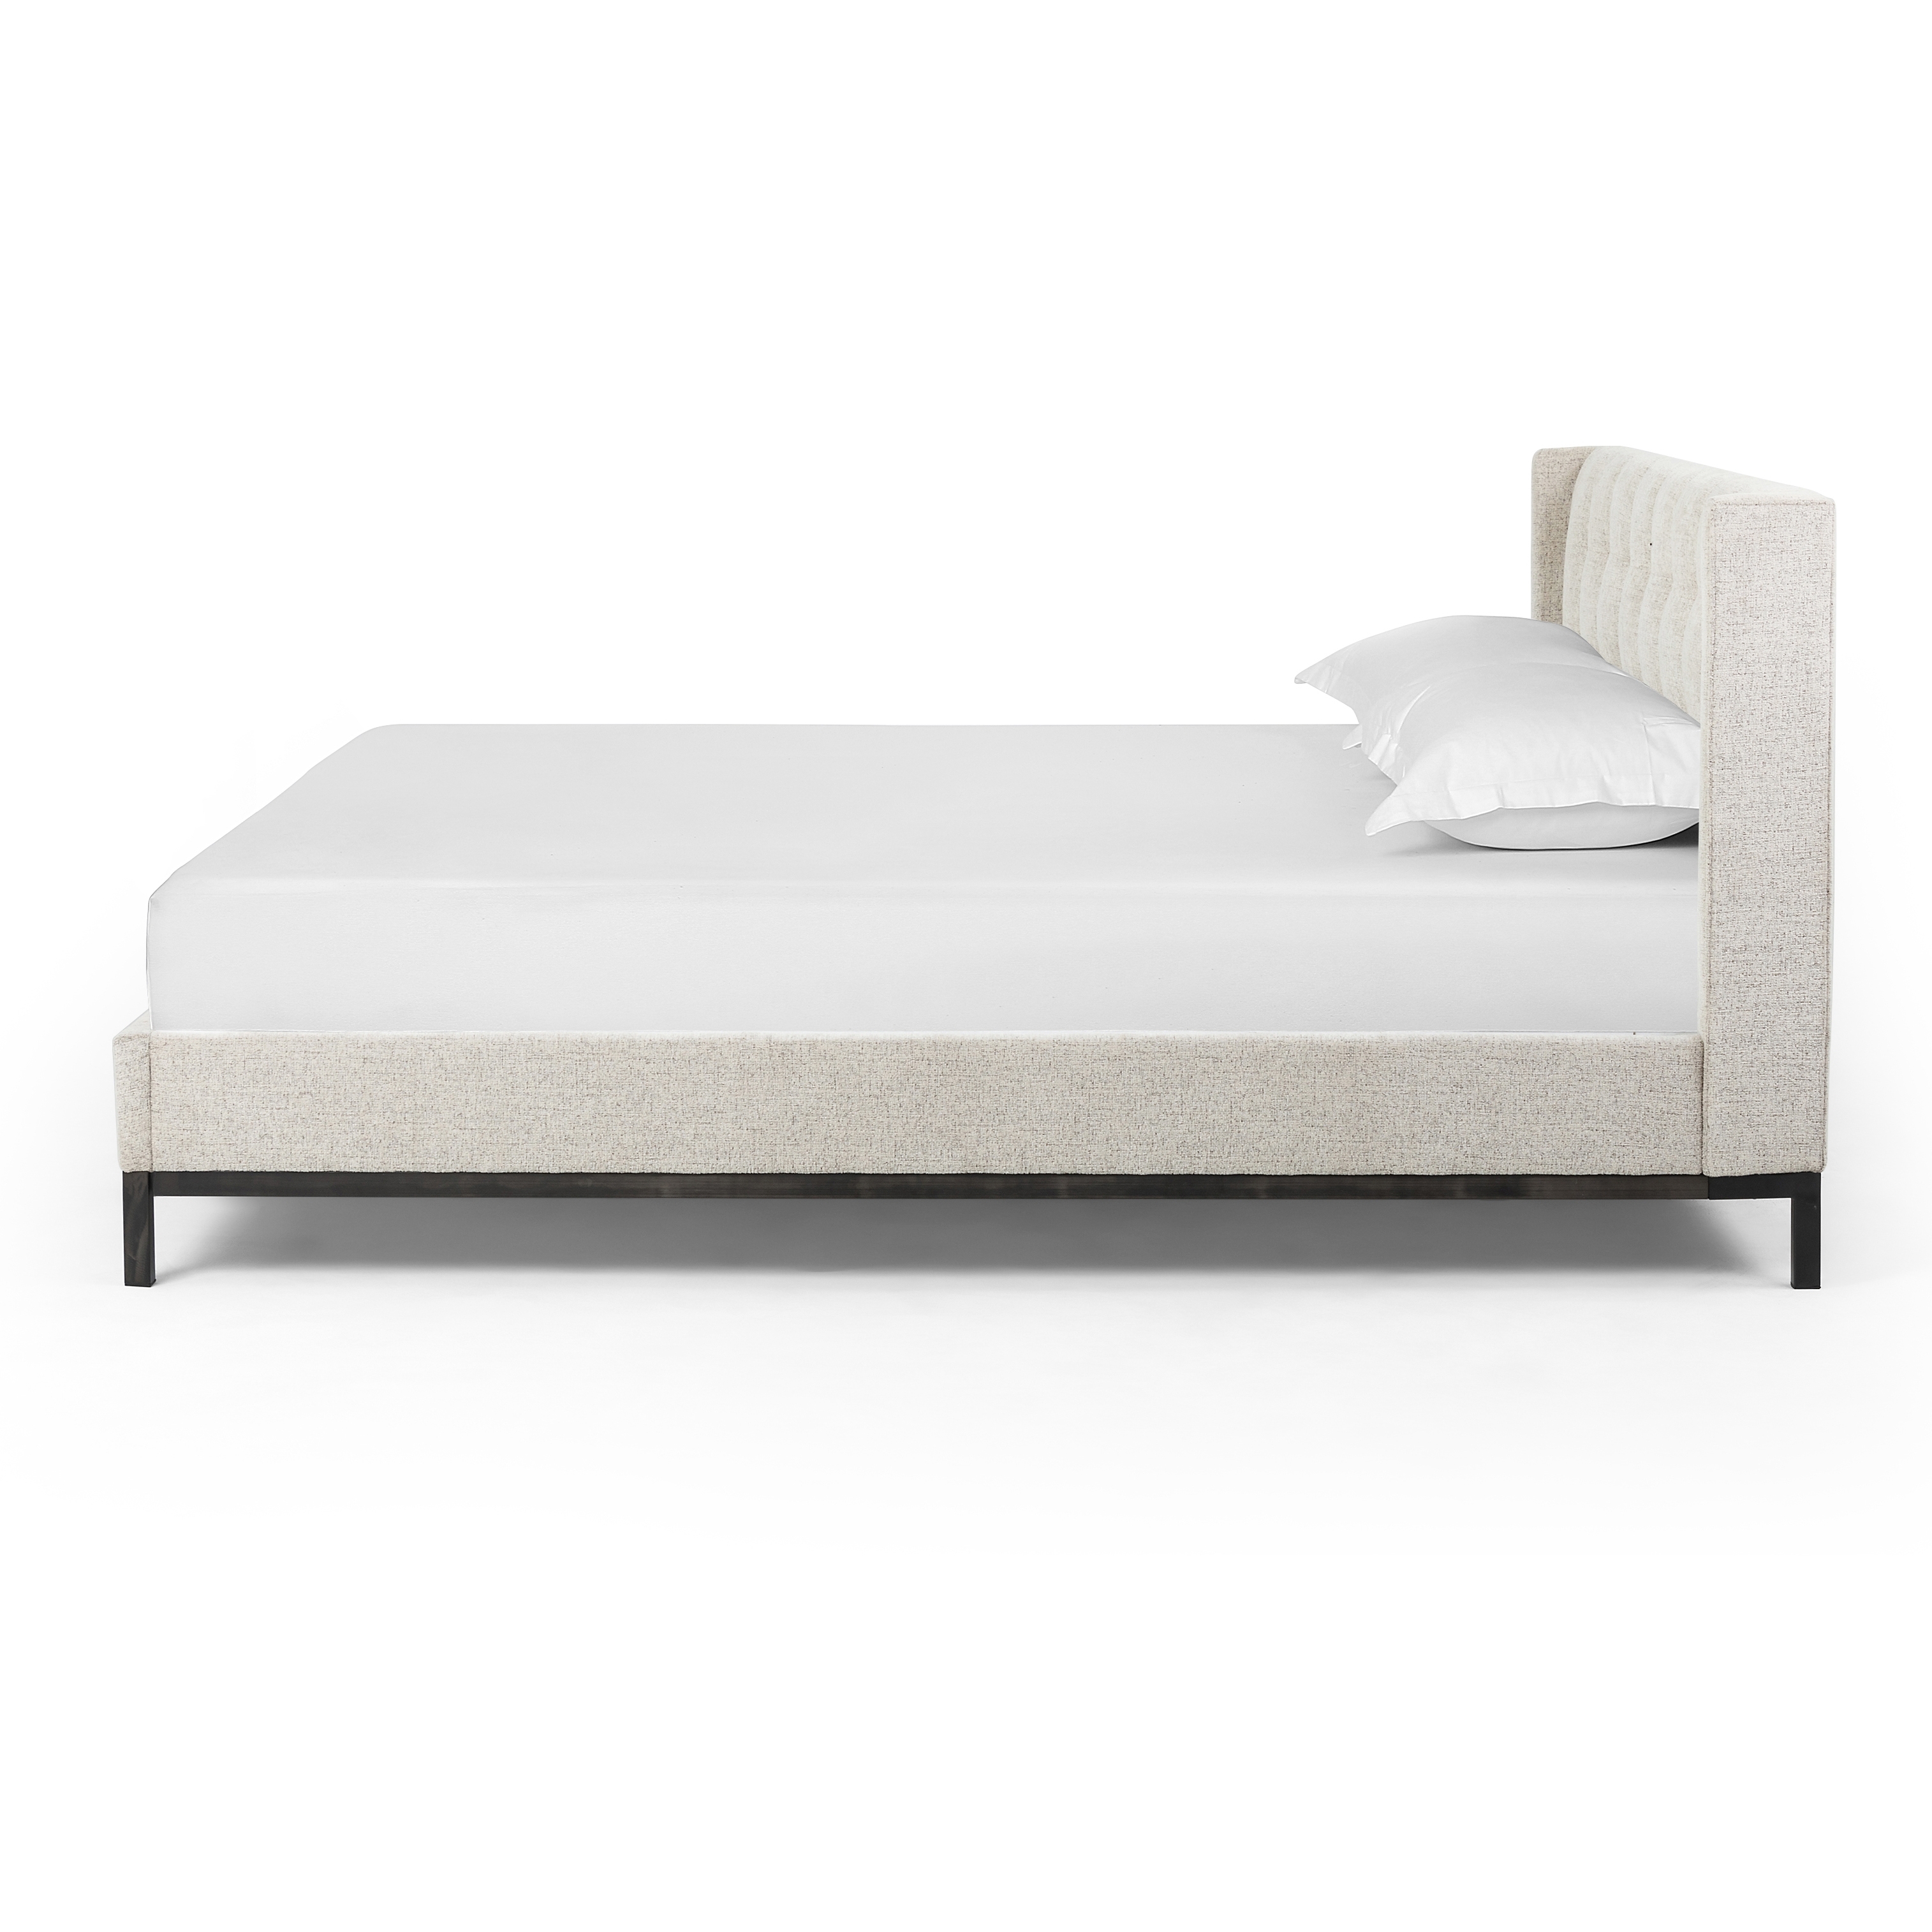 Newhall Bed-Plushtone Linen-King - Image 3